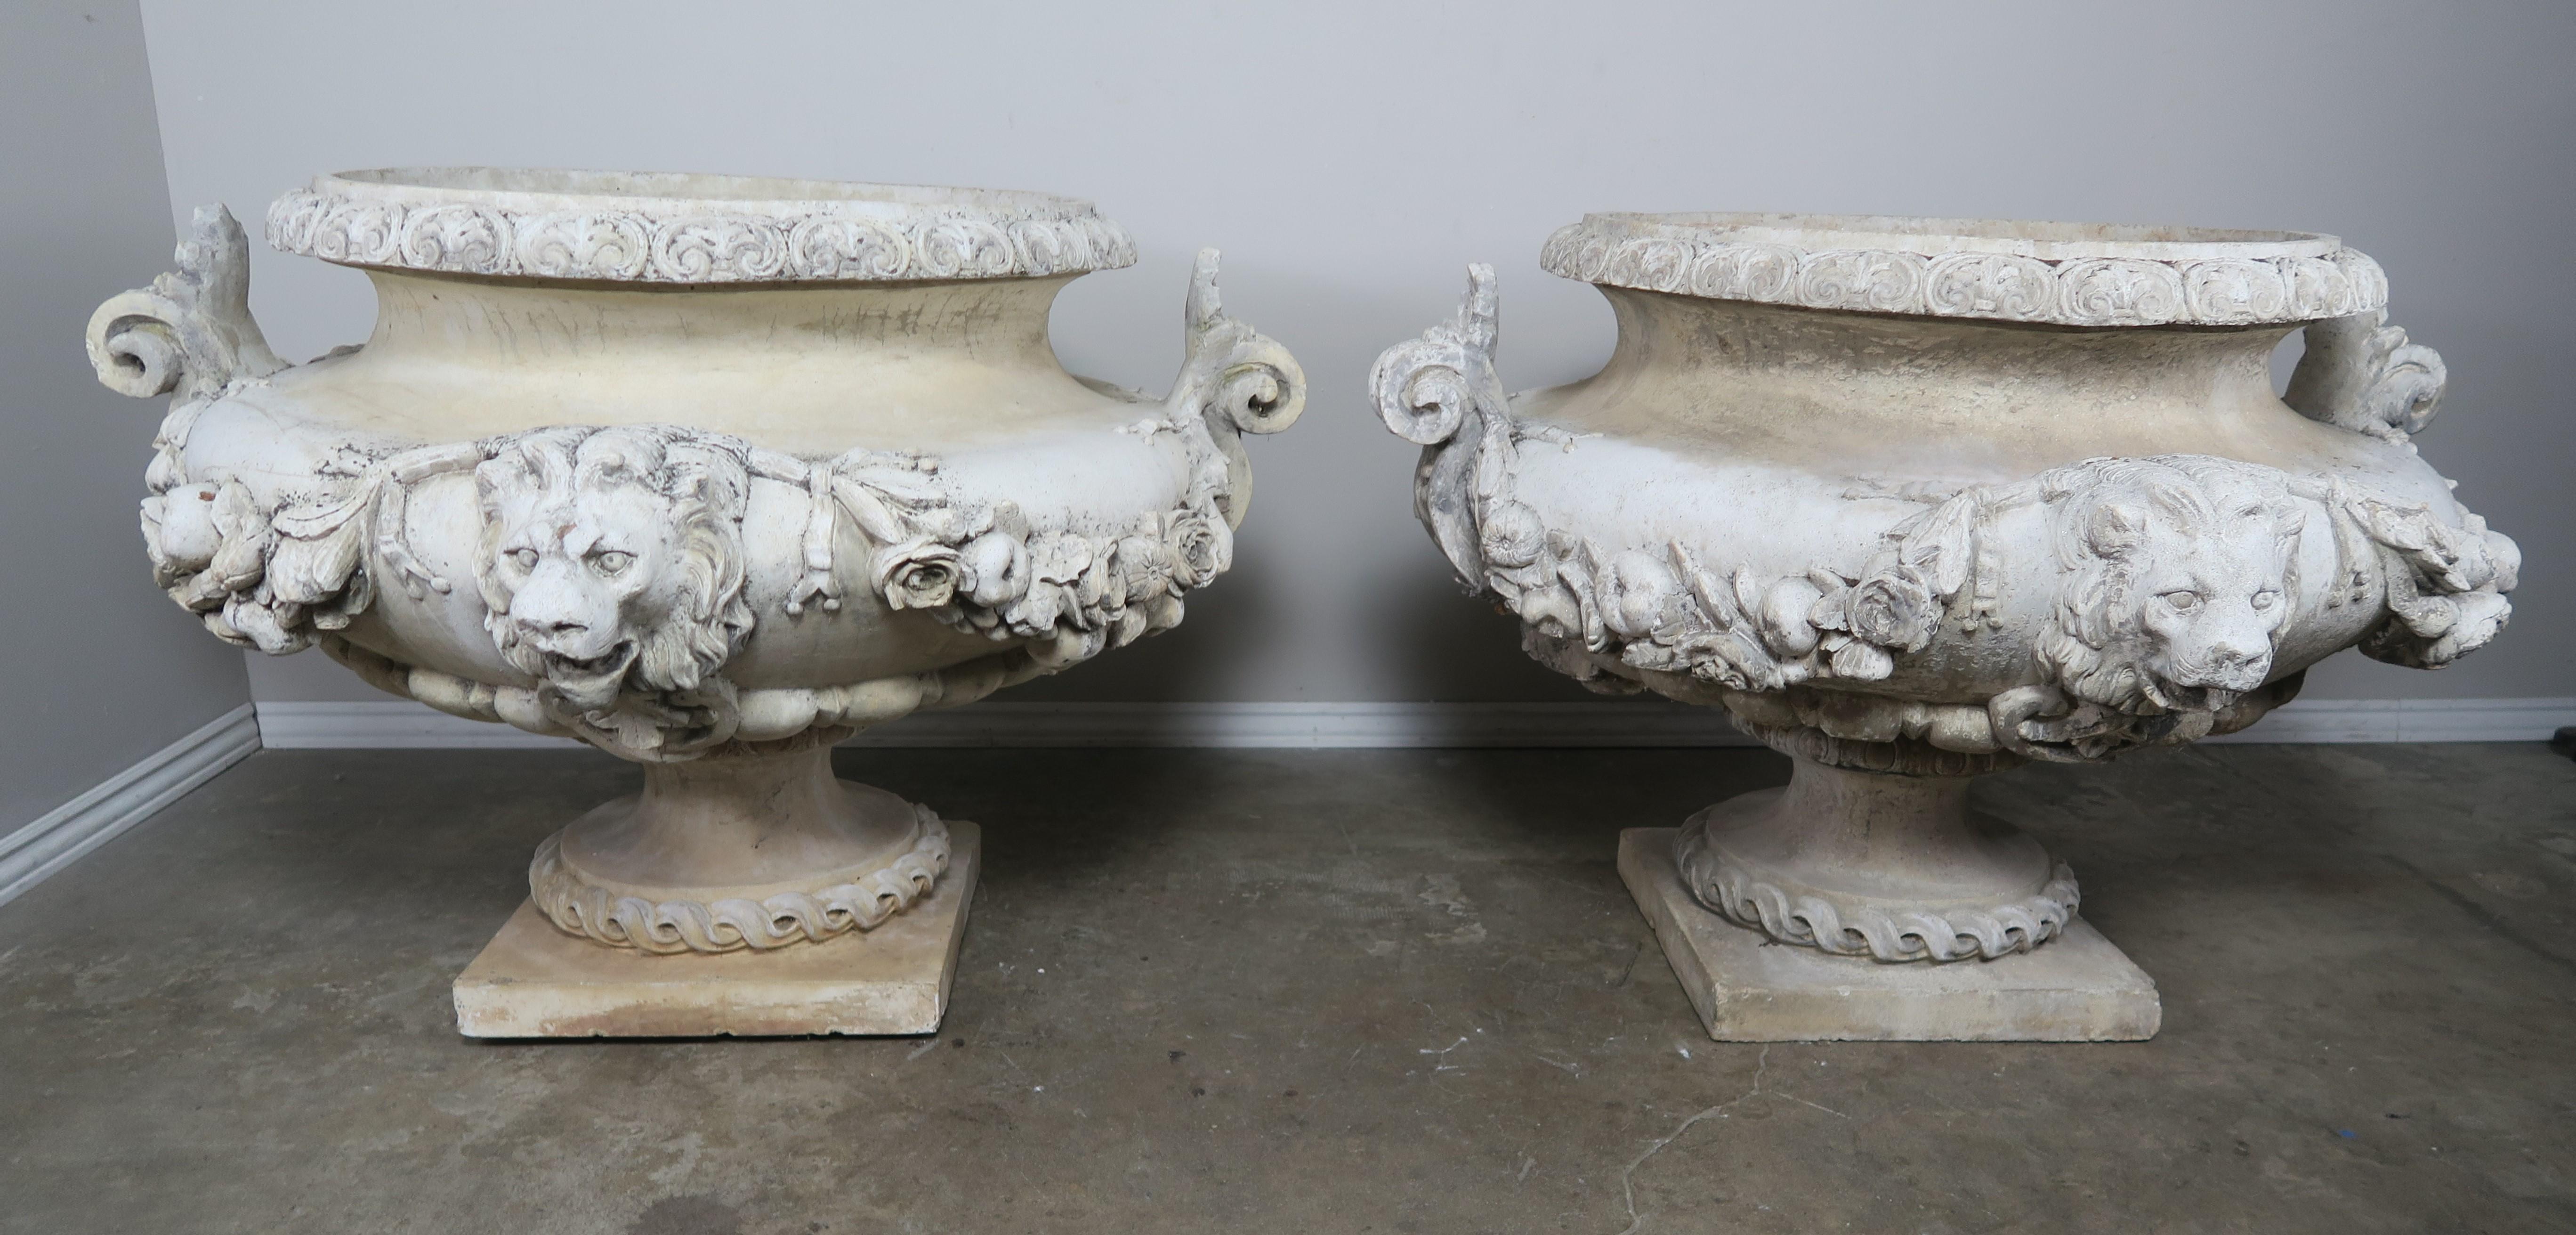 Pair of 19th century monumental Italian terra cotta planters with lion faces and garlands of fruit and flowers.